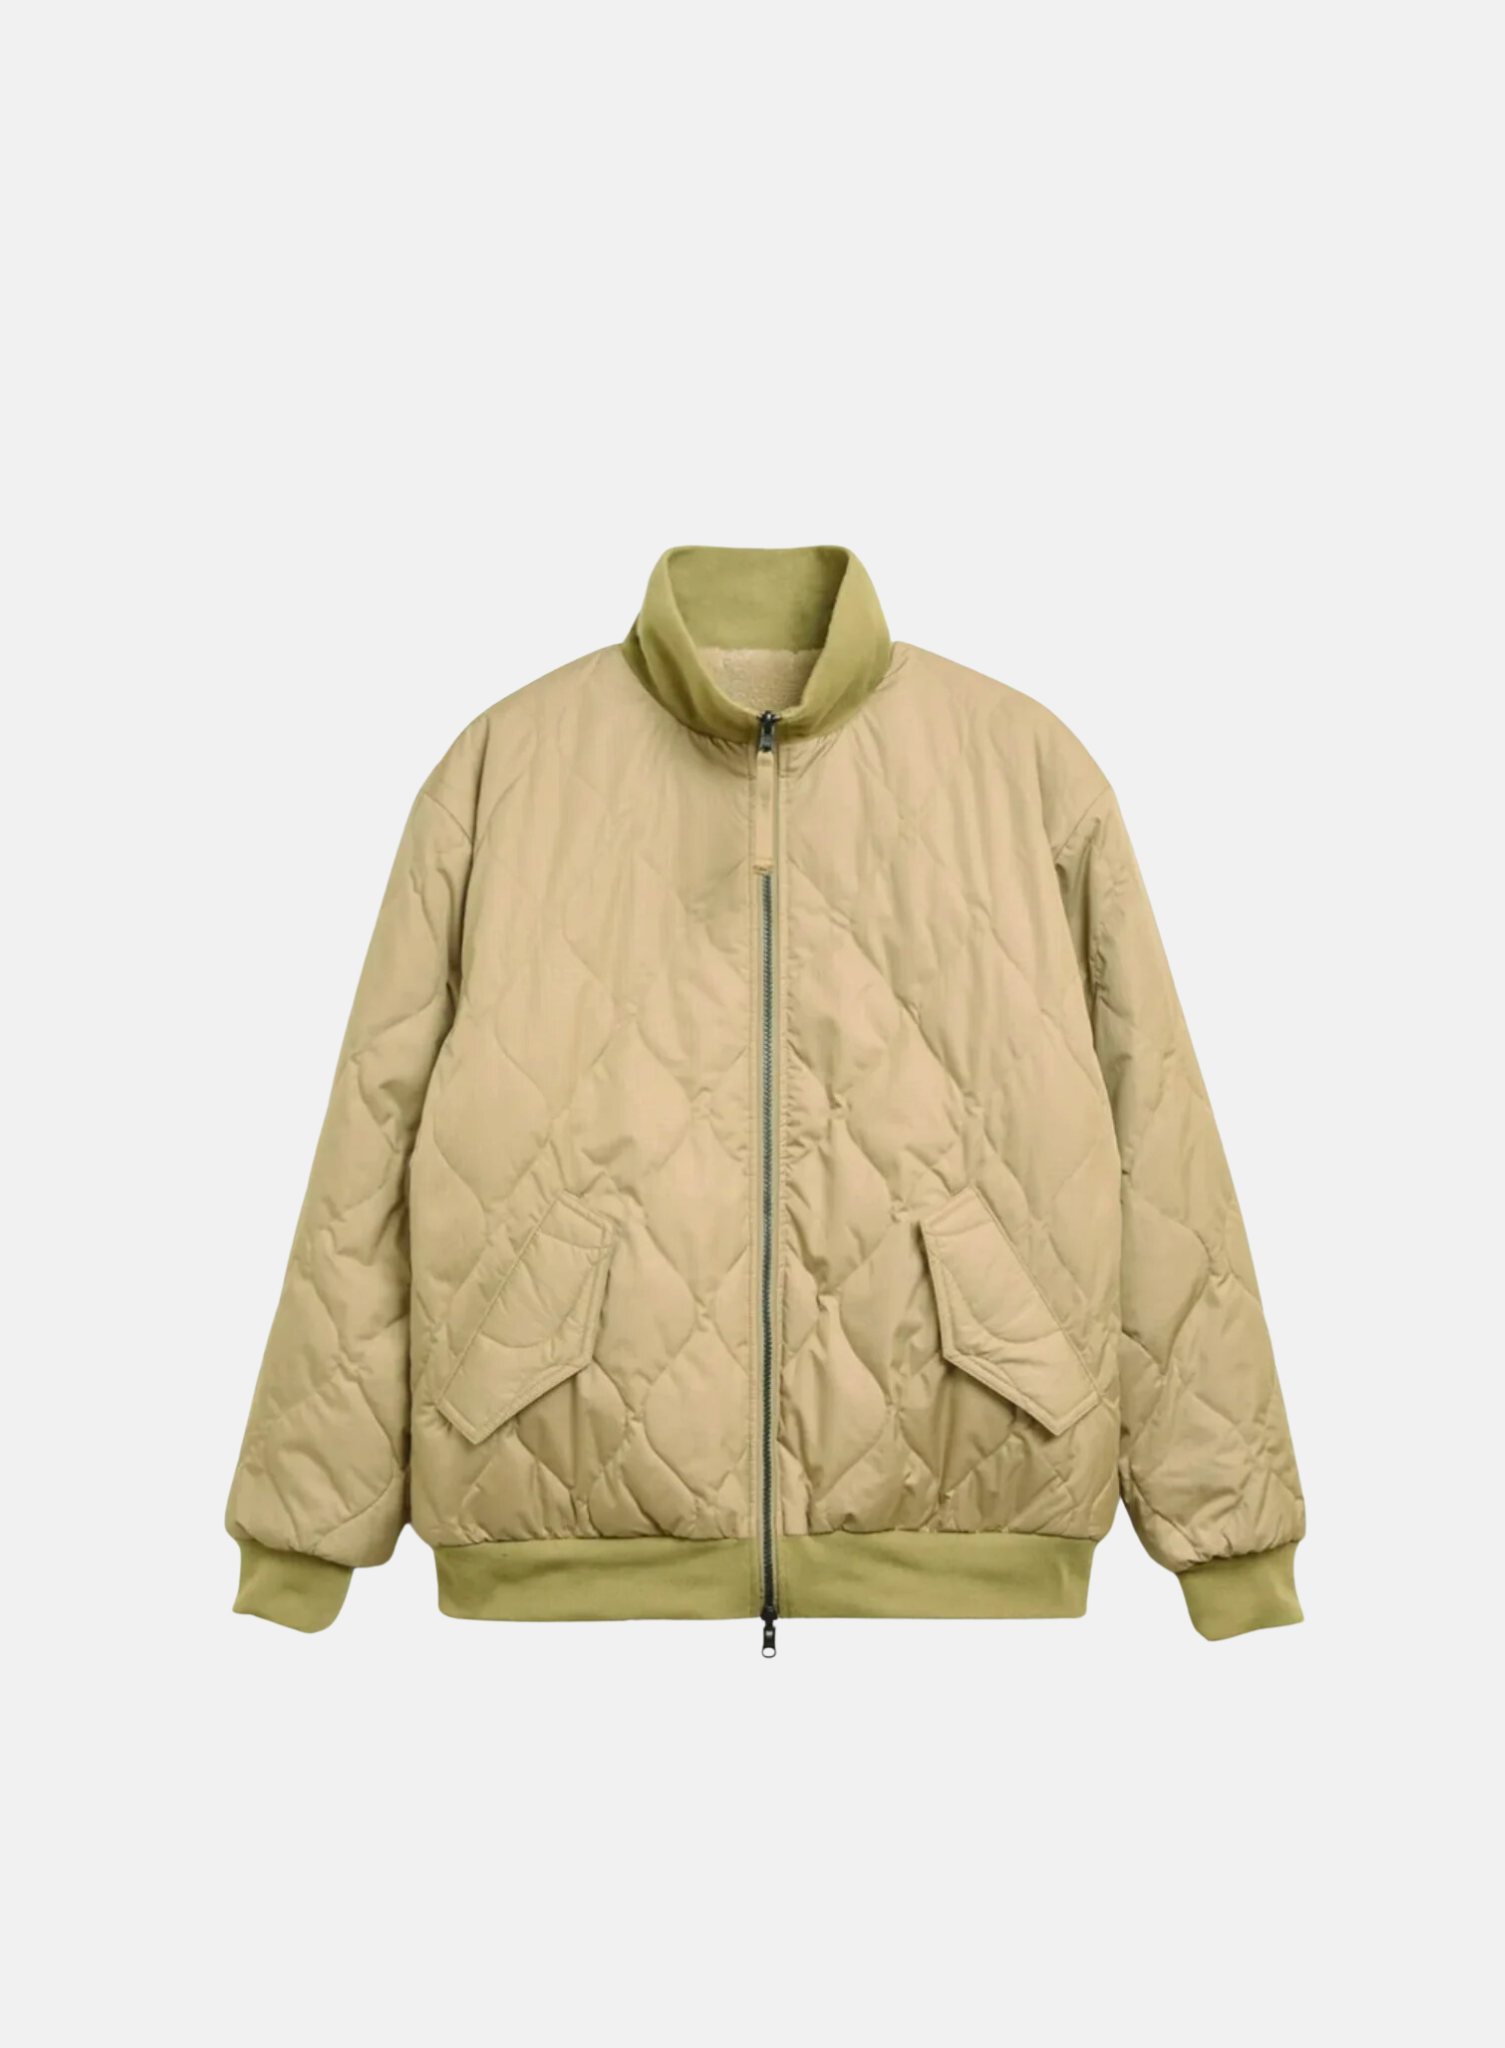 TAION REVERSIBLE HI-NECK JACKET COYOTE/BEIGE - Hympala Store 